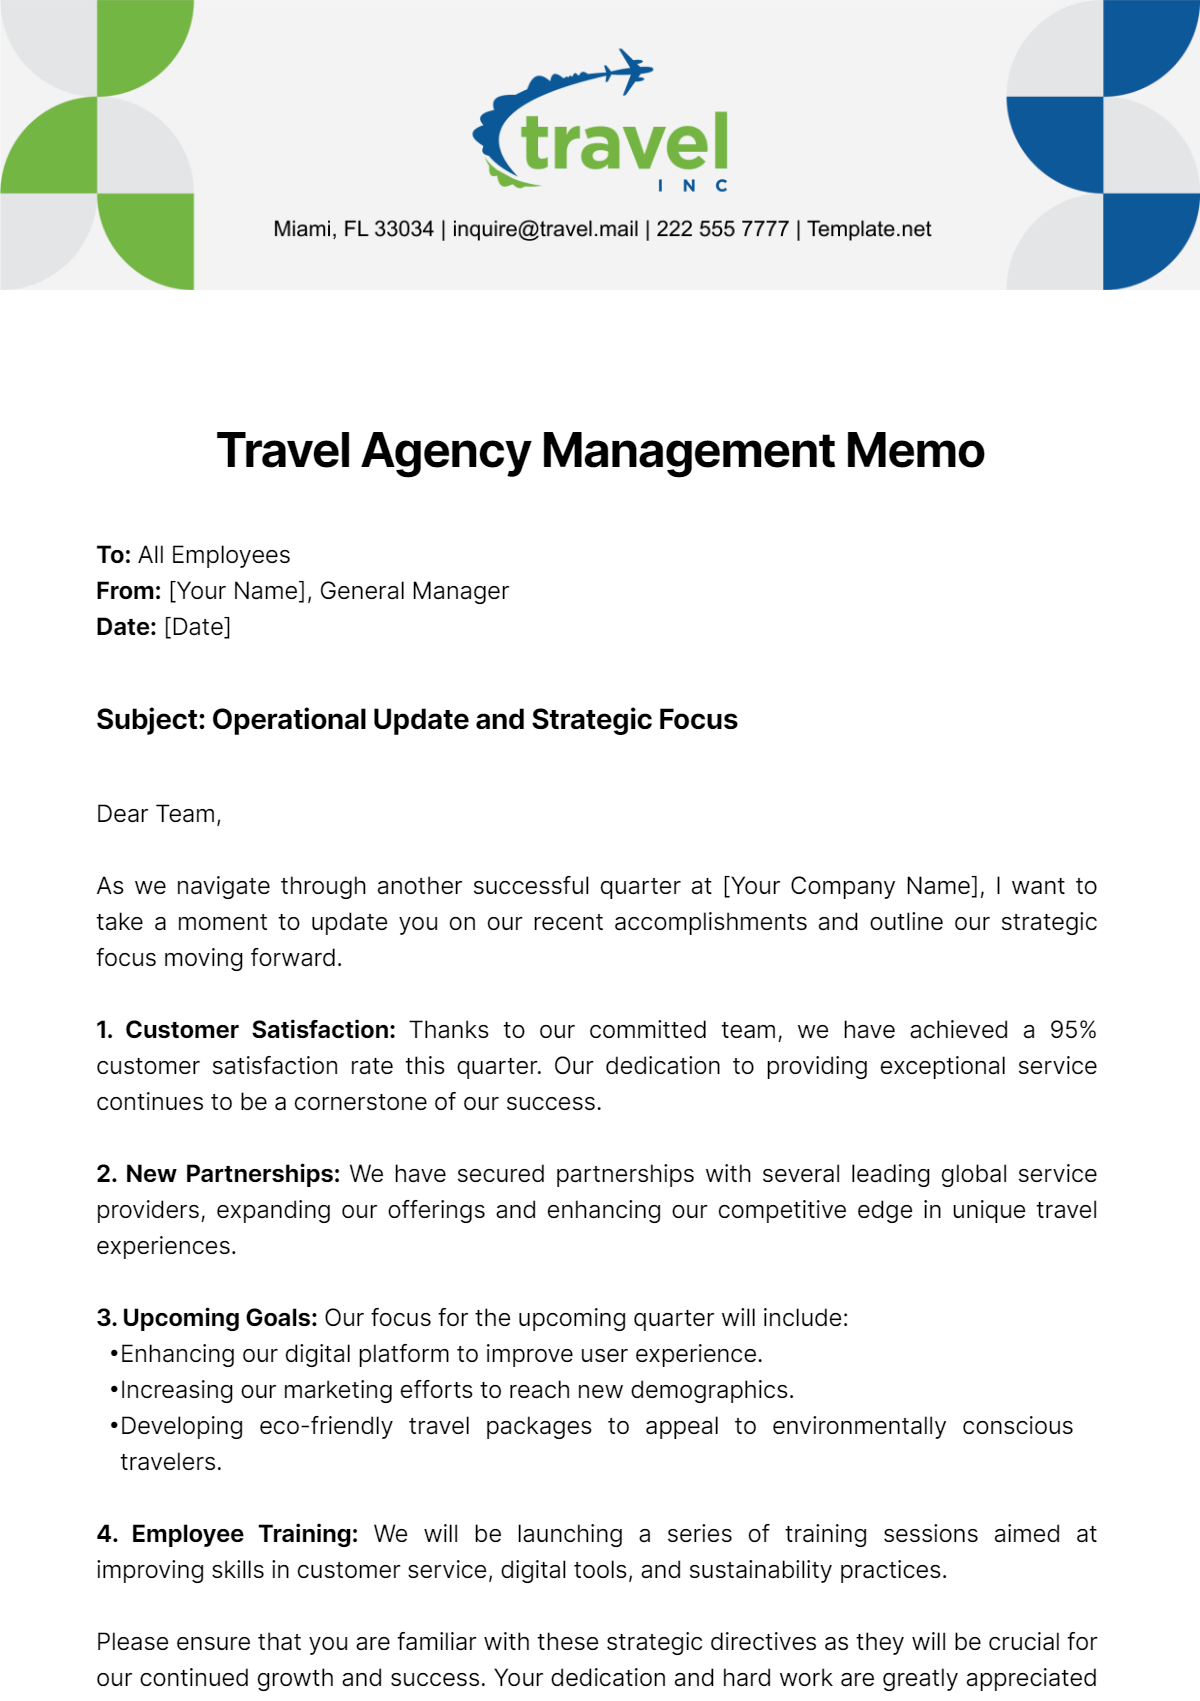 Travel Agency Management Memo Template